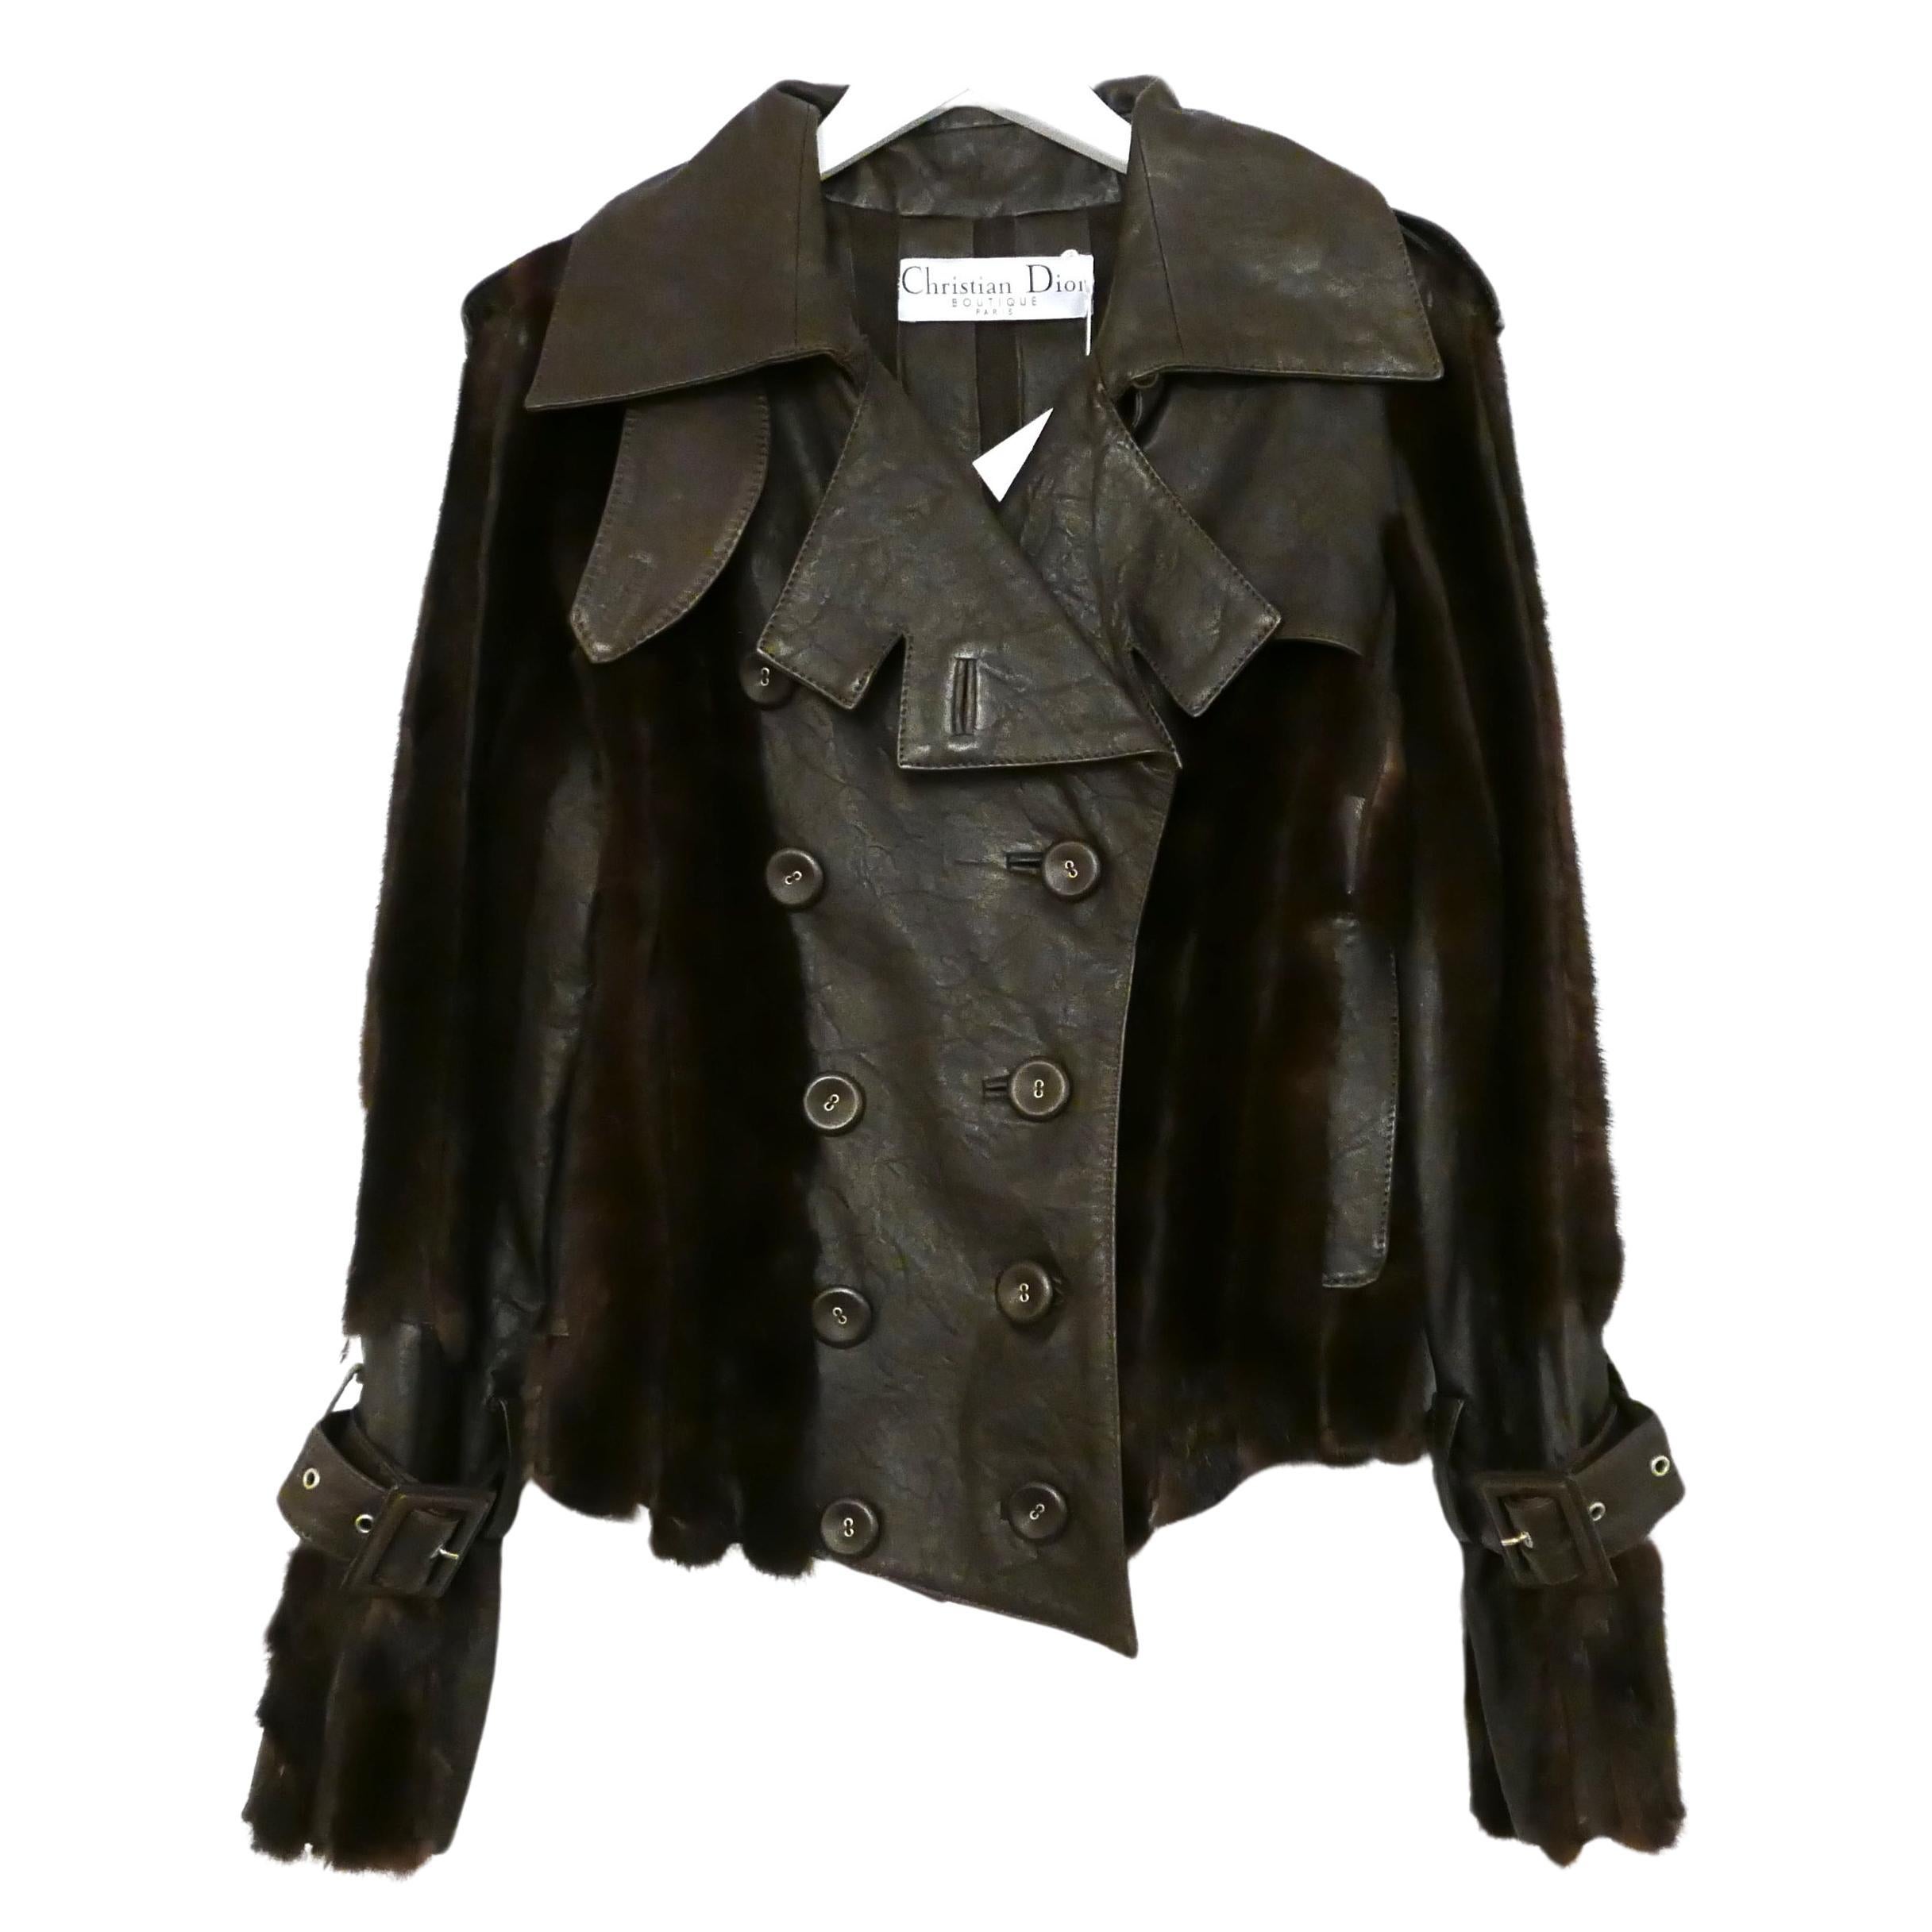 Christian Dior x Galliano 2006 Brown Mink, Leather & Tulle Biker Jacket For Sale